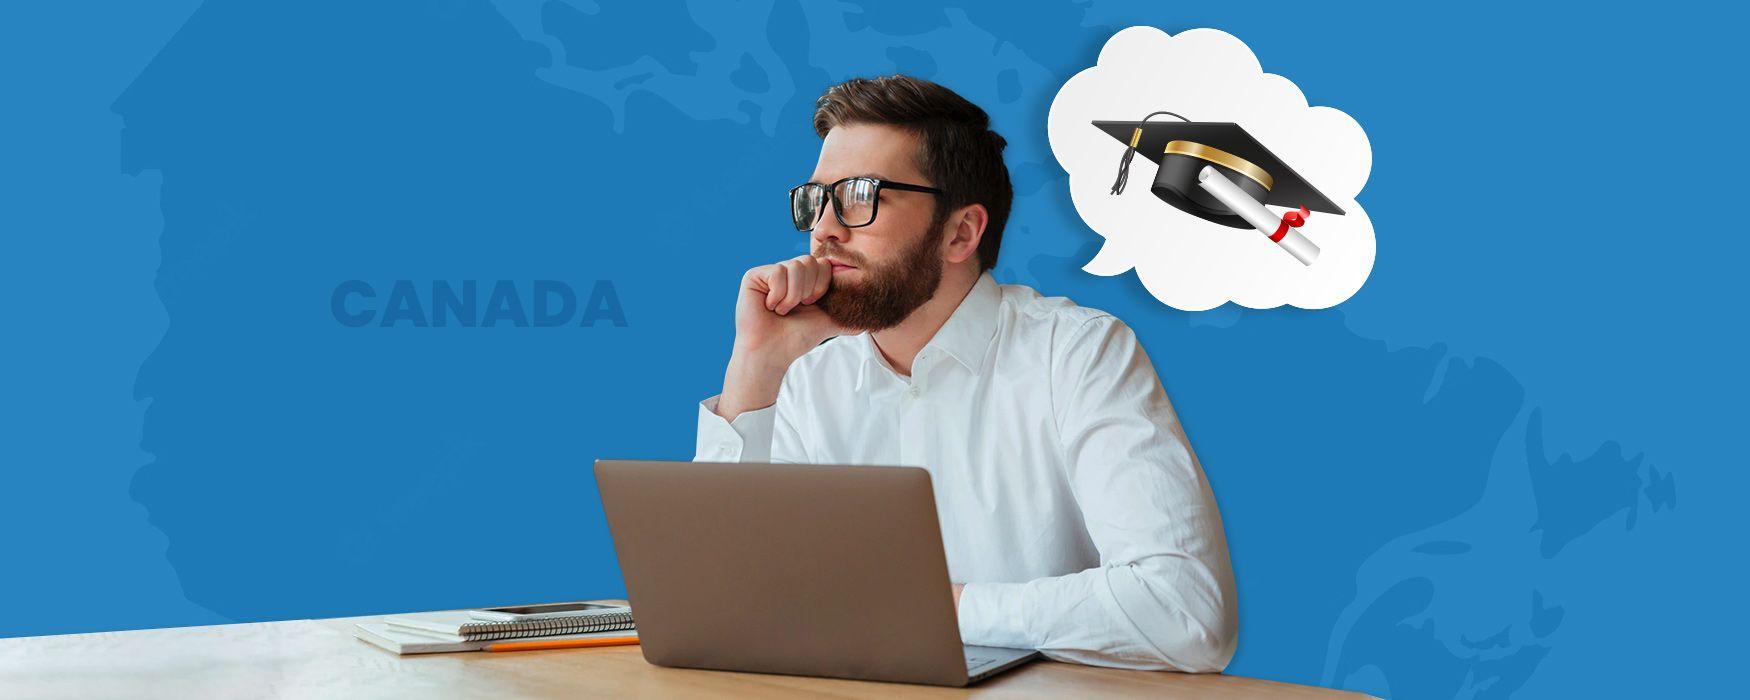 phd in canada for management